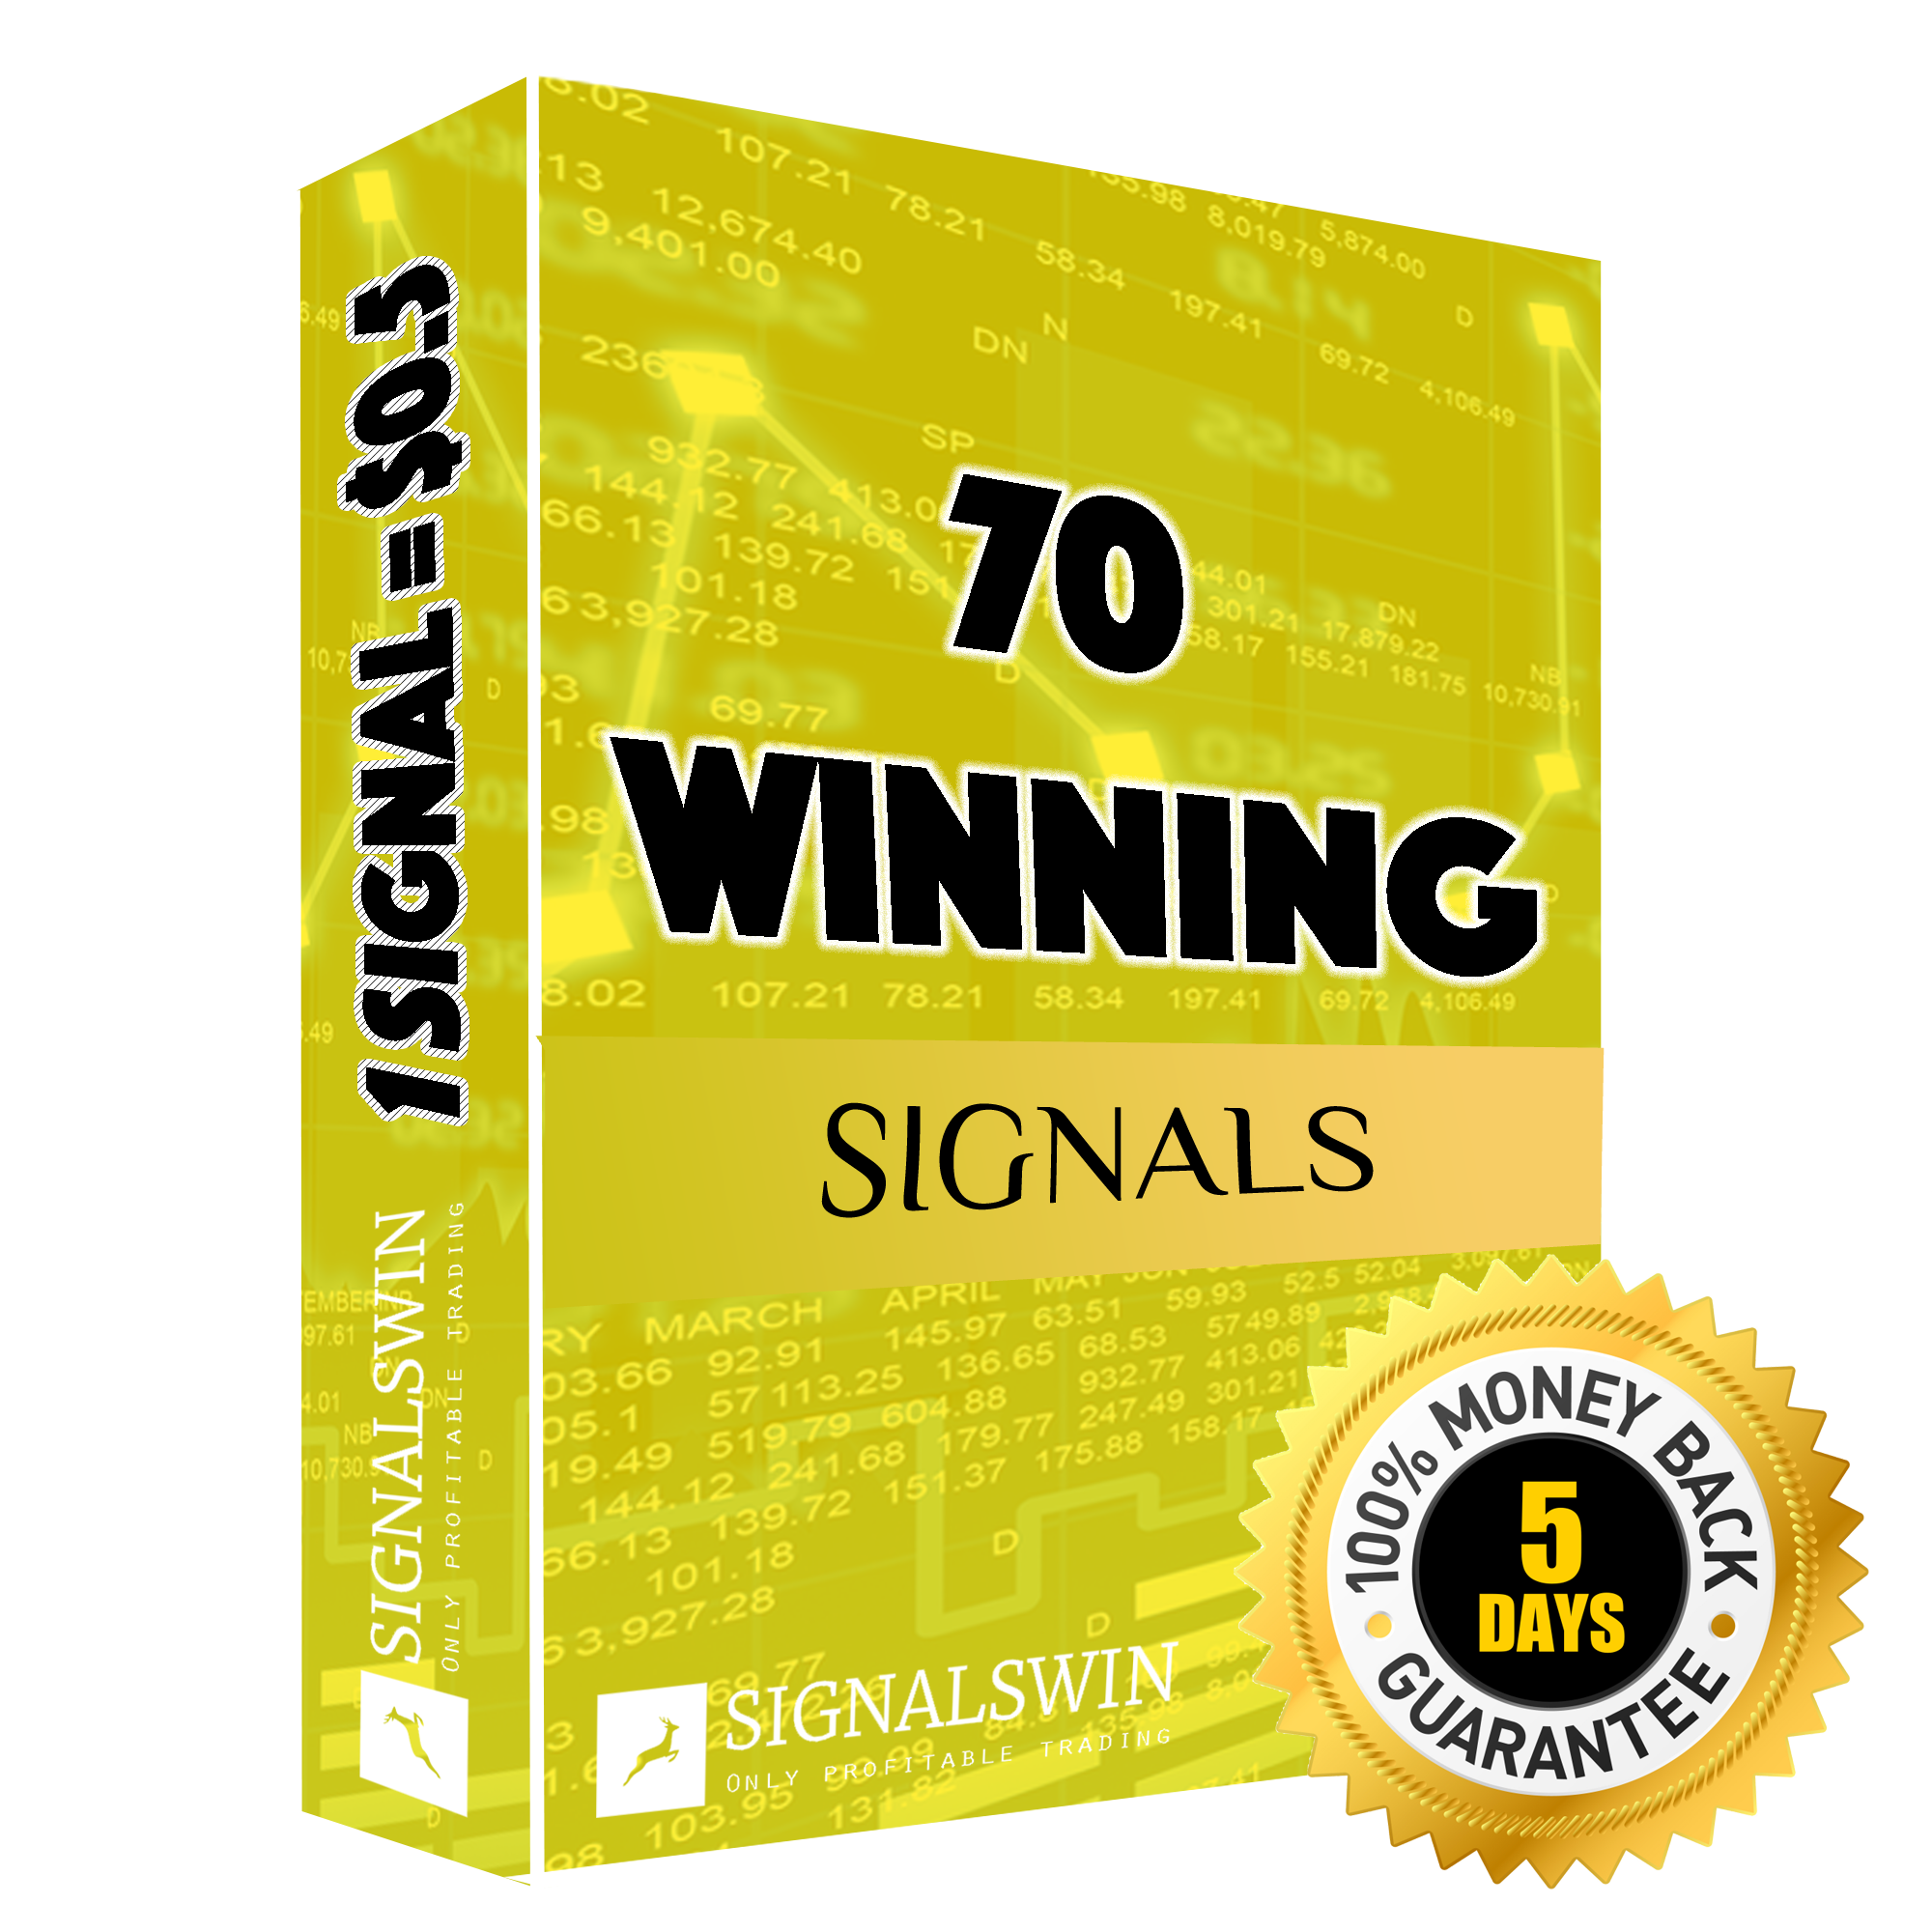 70 signals - Instead of paying $70 , the price is $35 - You have 5 days to try out the package - You have 100% Money back guarantee on this package